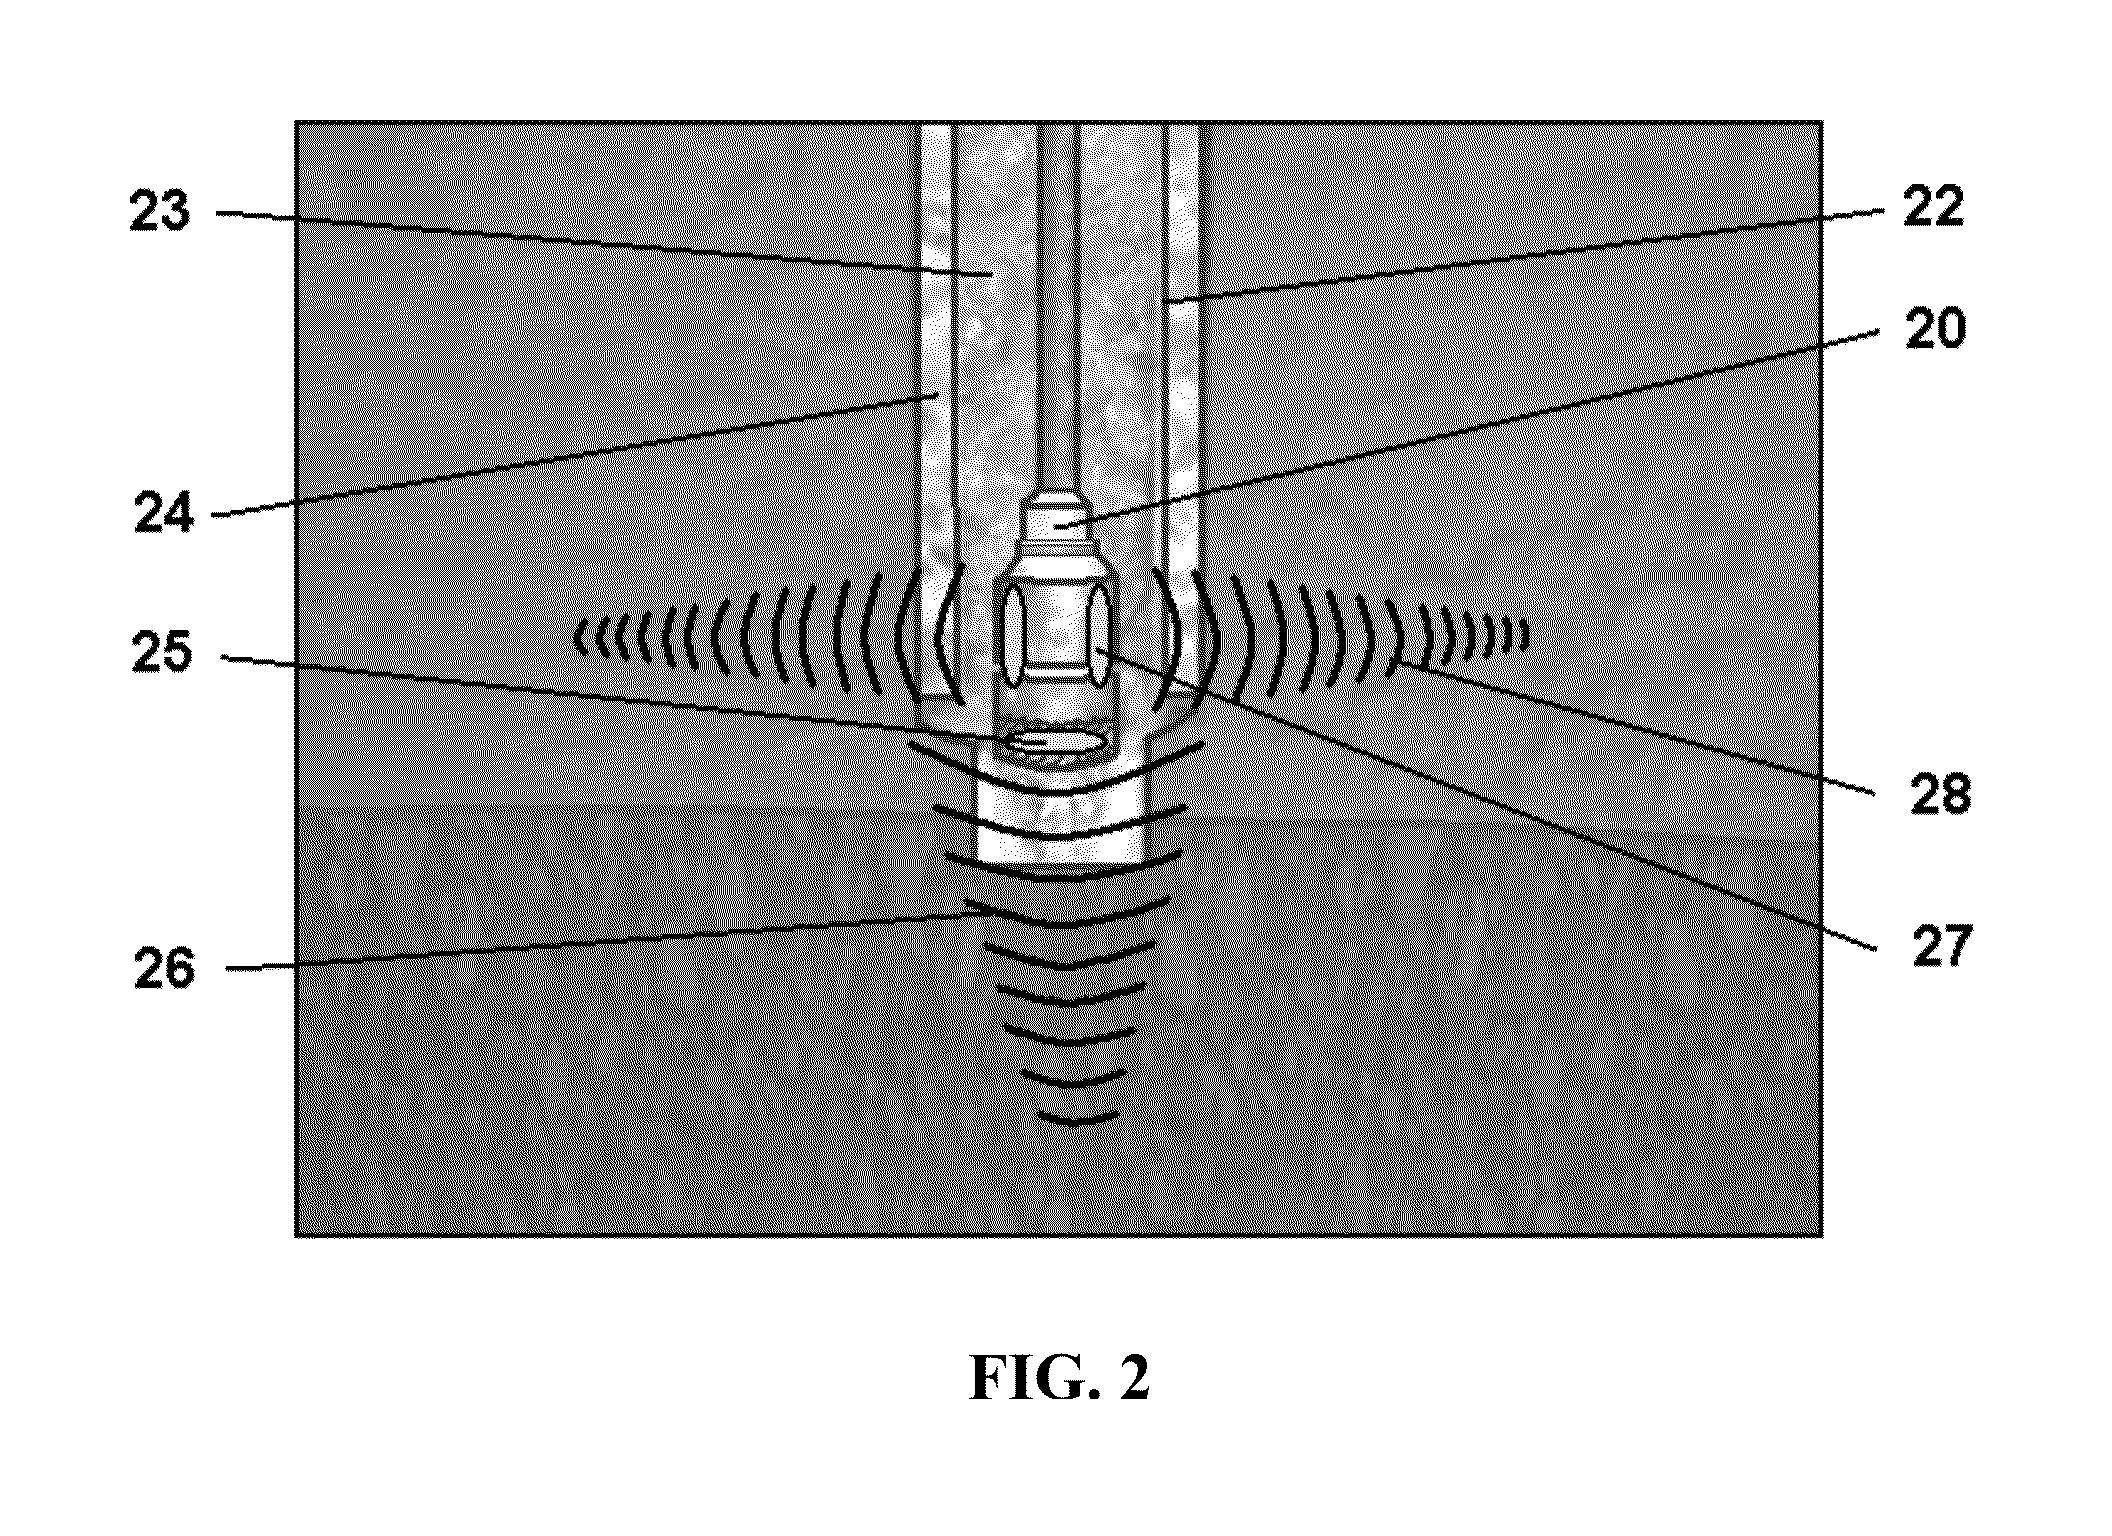 Apparatuses and methods for generating shock waves for use in the energy industry